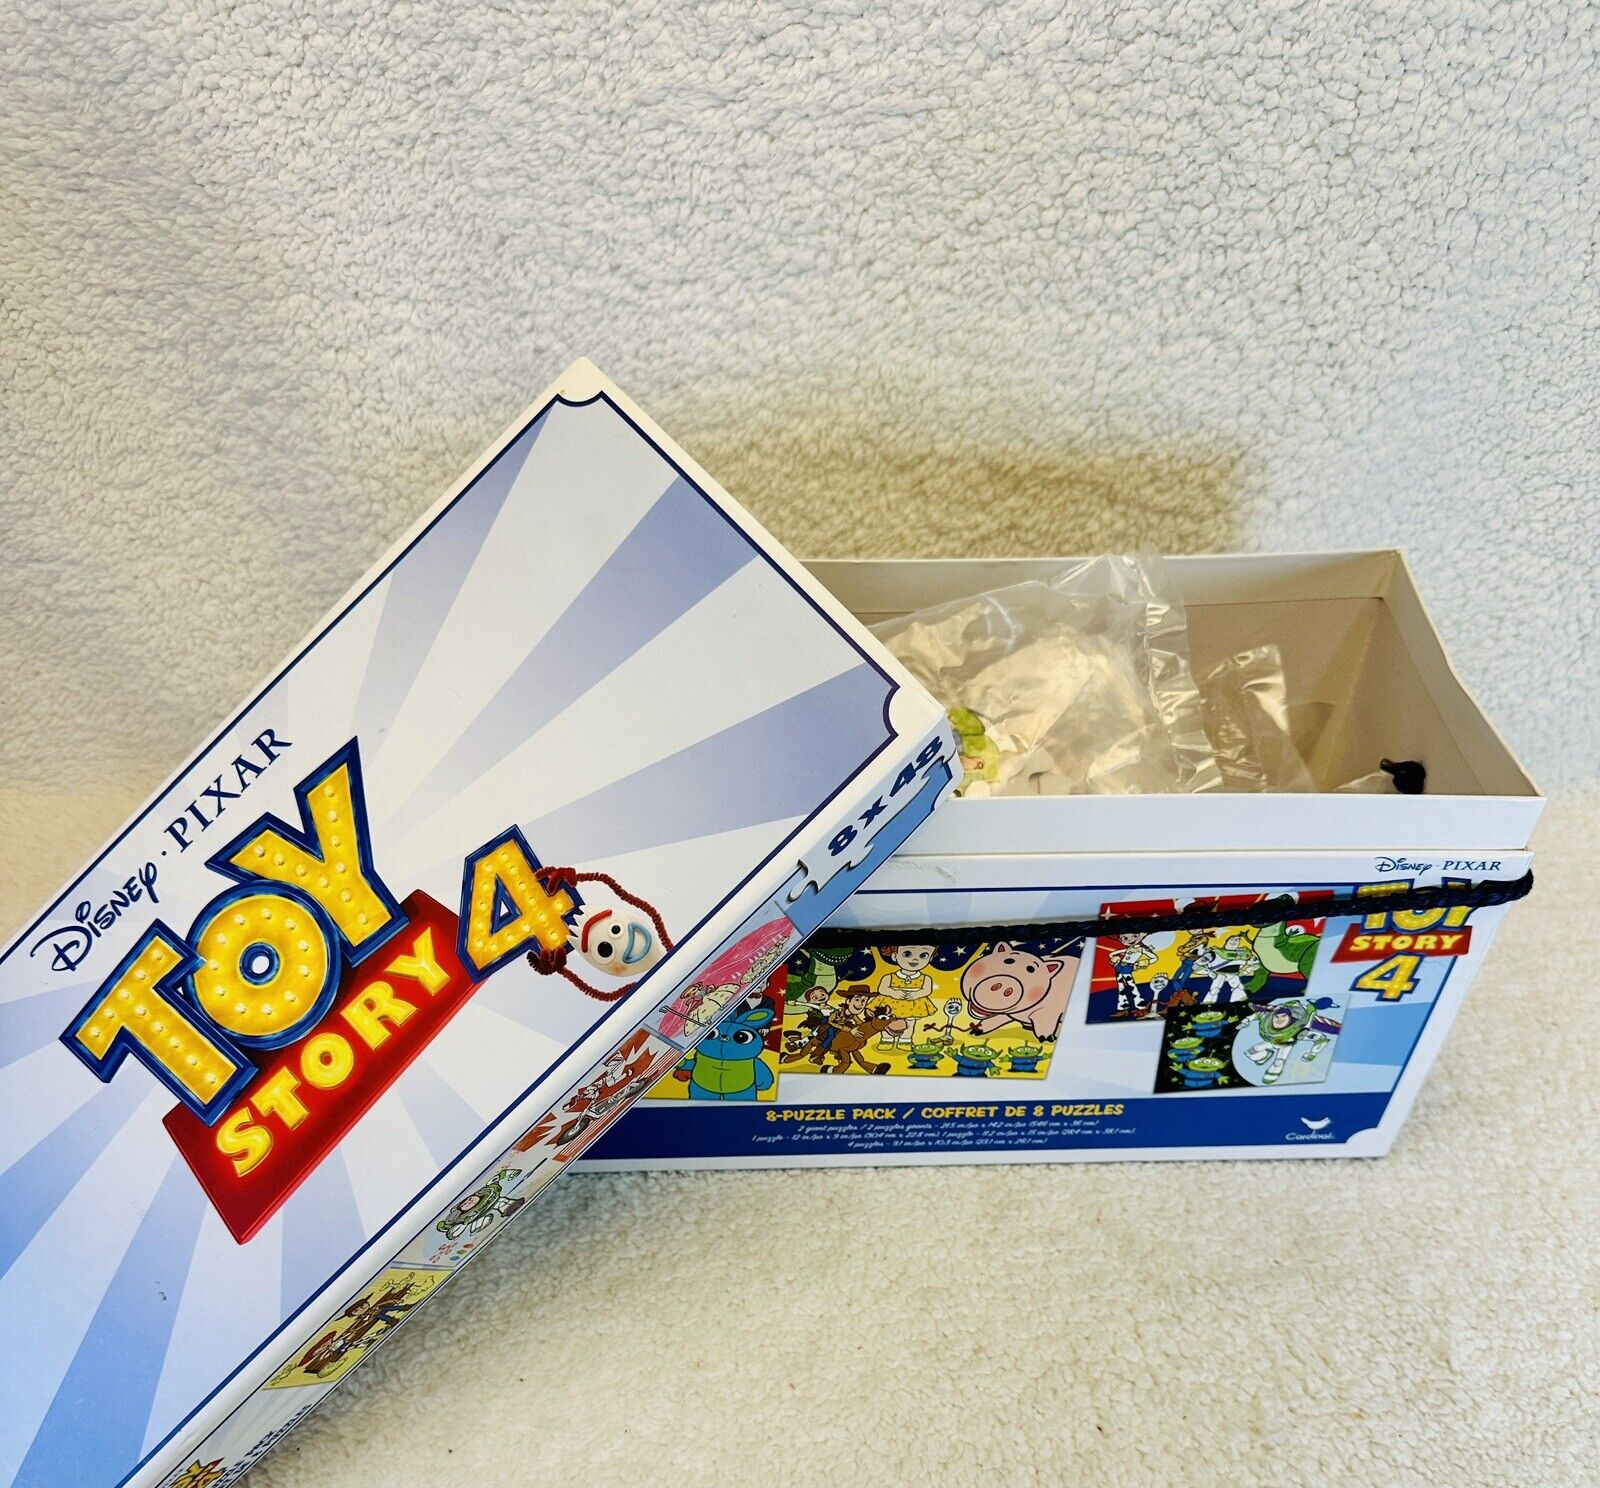 Disney Toy Story 4 8 Puzzle Pack Box With Box And Handle Size Of Puzzle 8 By 48